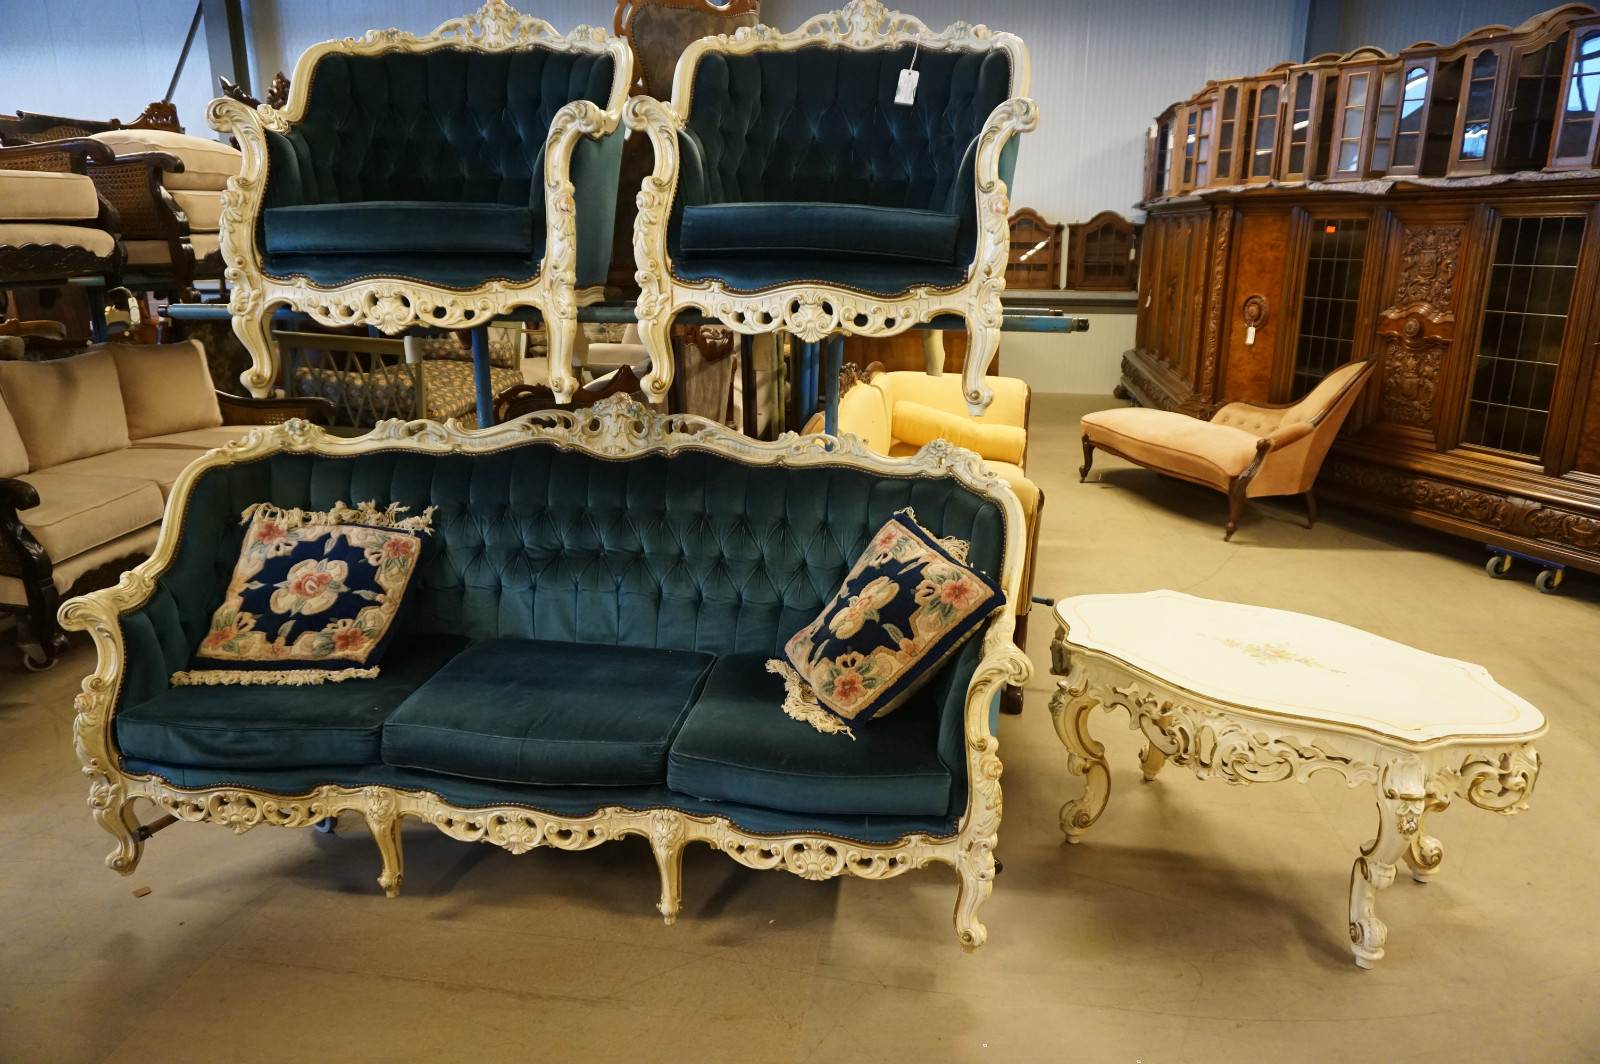 Sofas - Items by category - European ANTIQUES & DECORATIVE